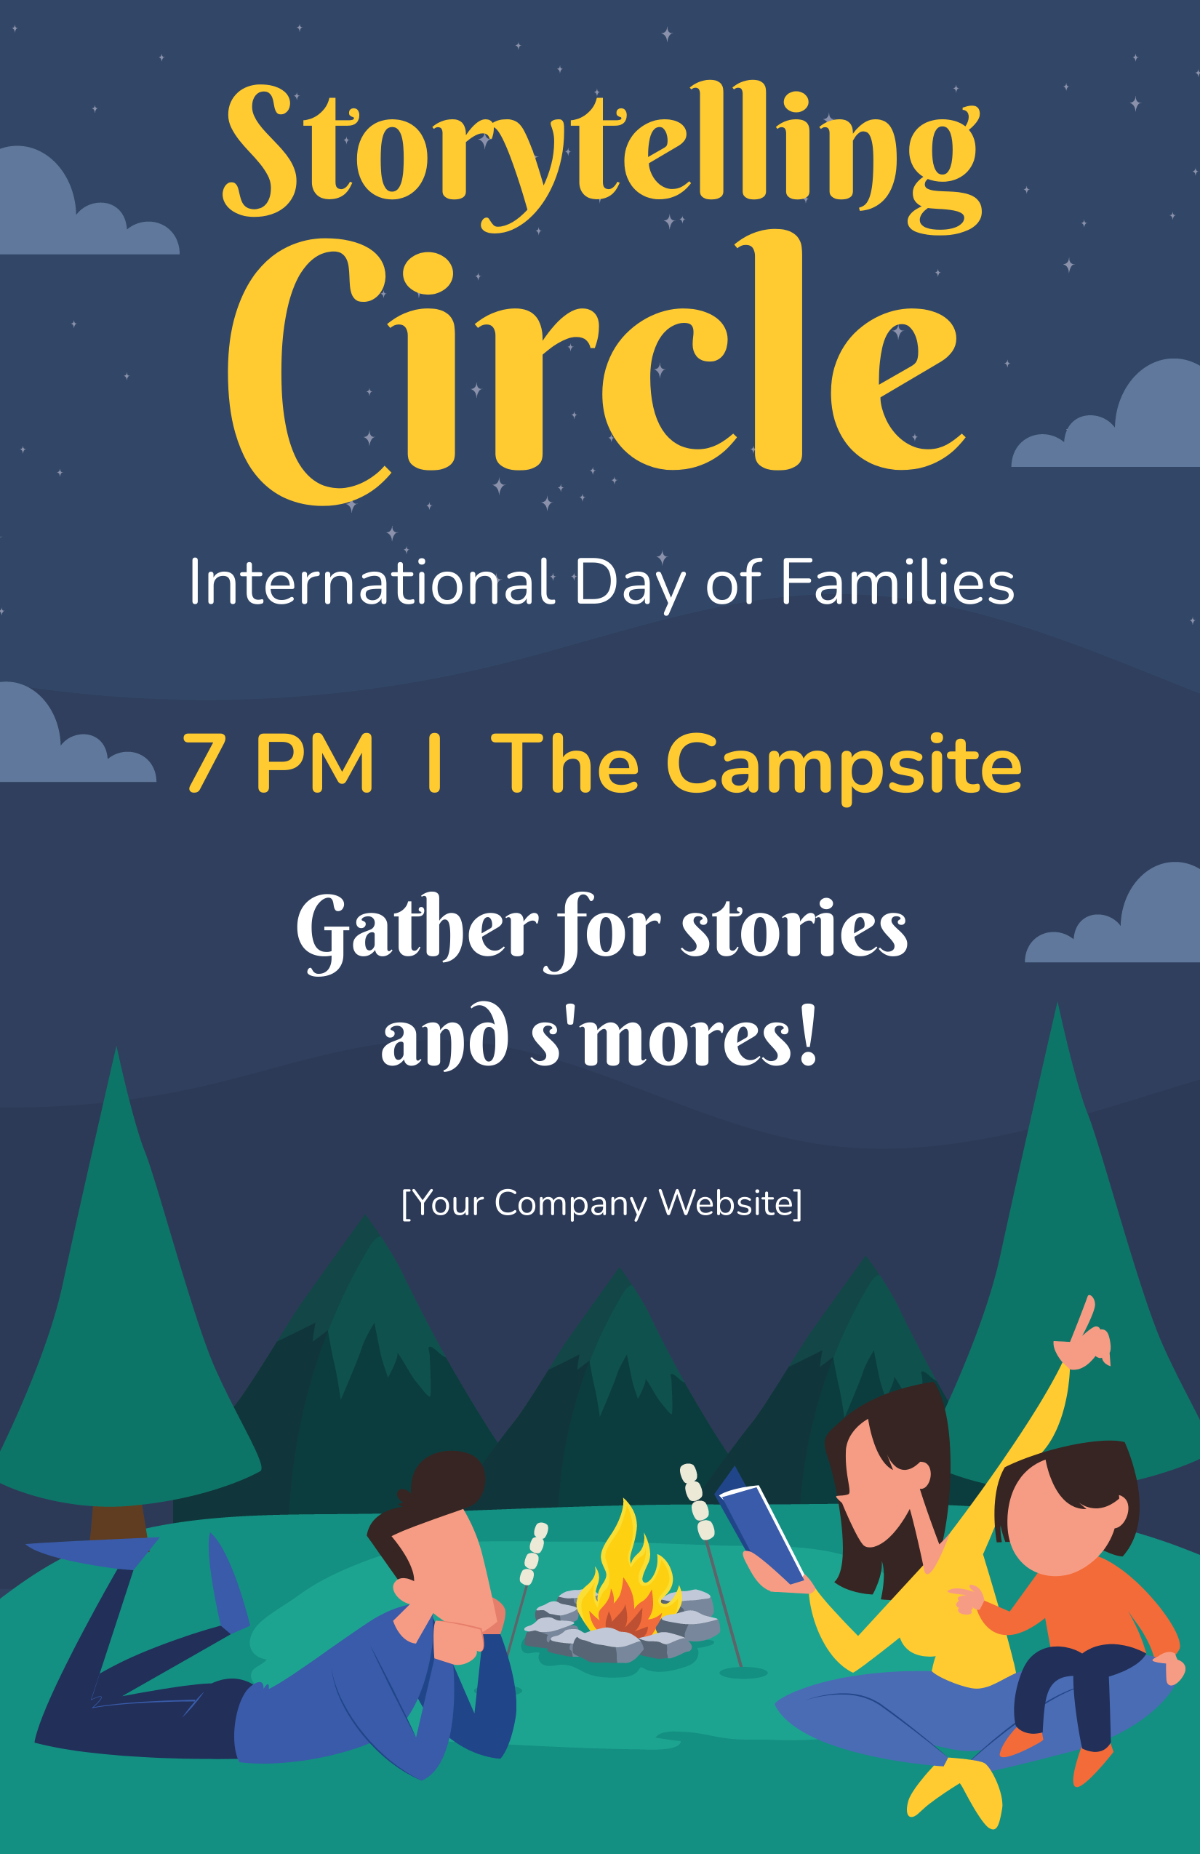 Free International Day of Families Poster Template